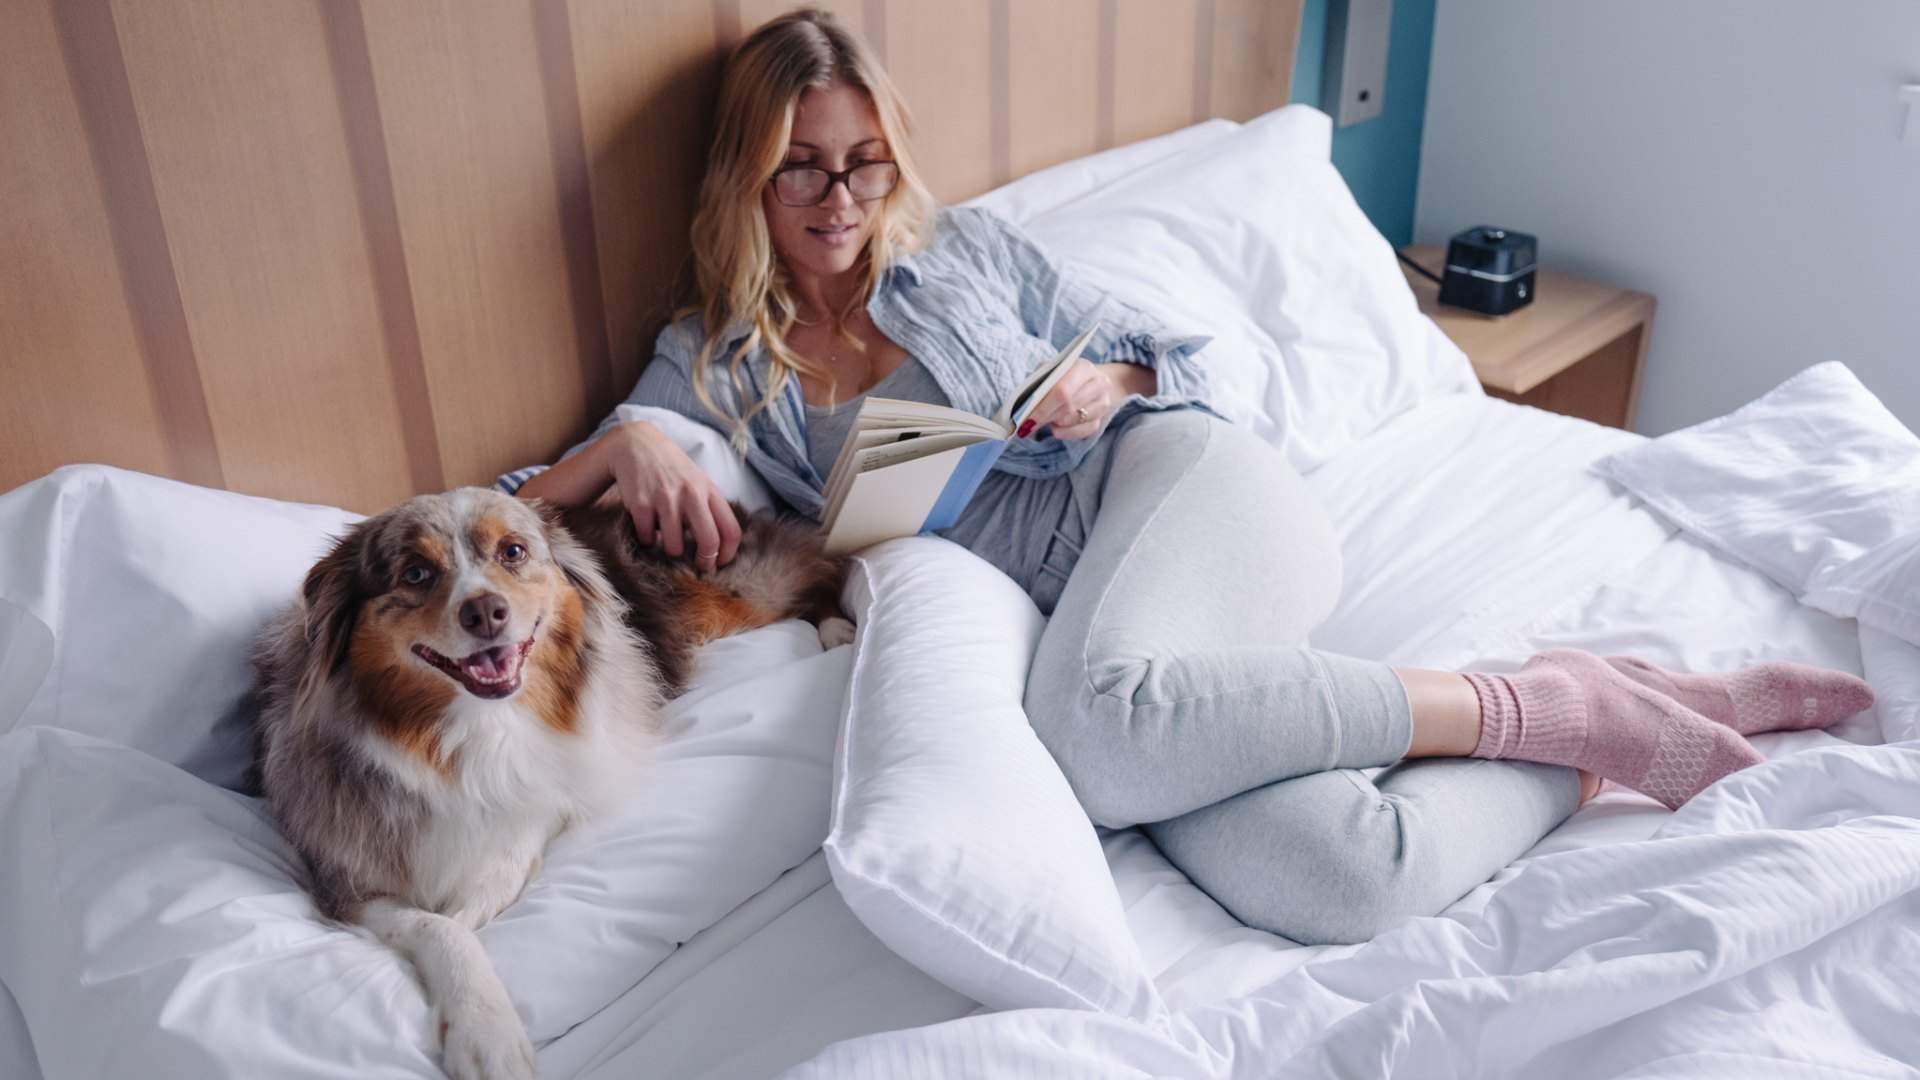 Element Richmond Is the Pet-Friendly Melbourne Hotel That'll Let Your Pooch Stay In Your Room